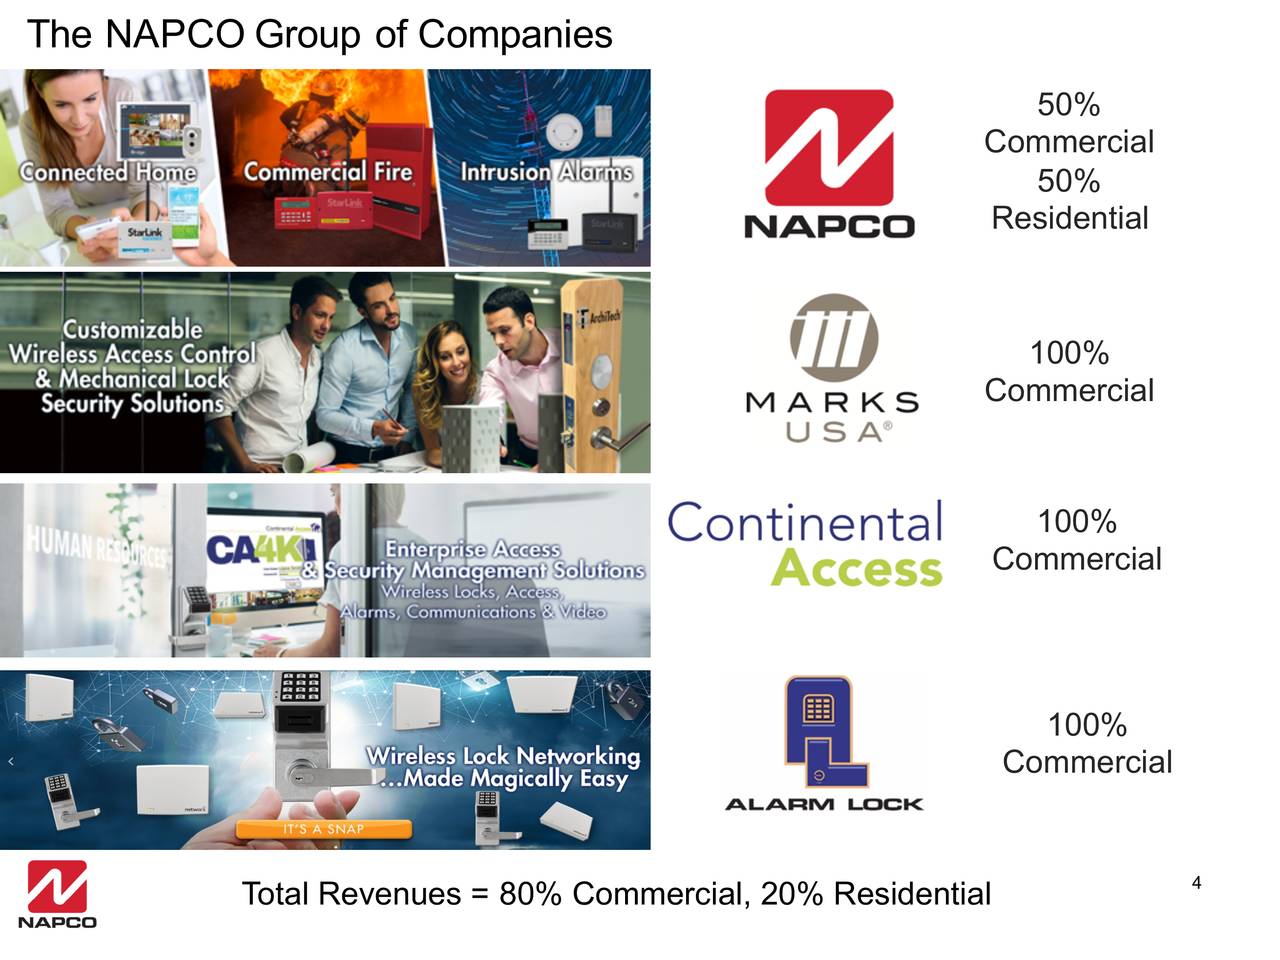 The NAPCO Group of Companies